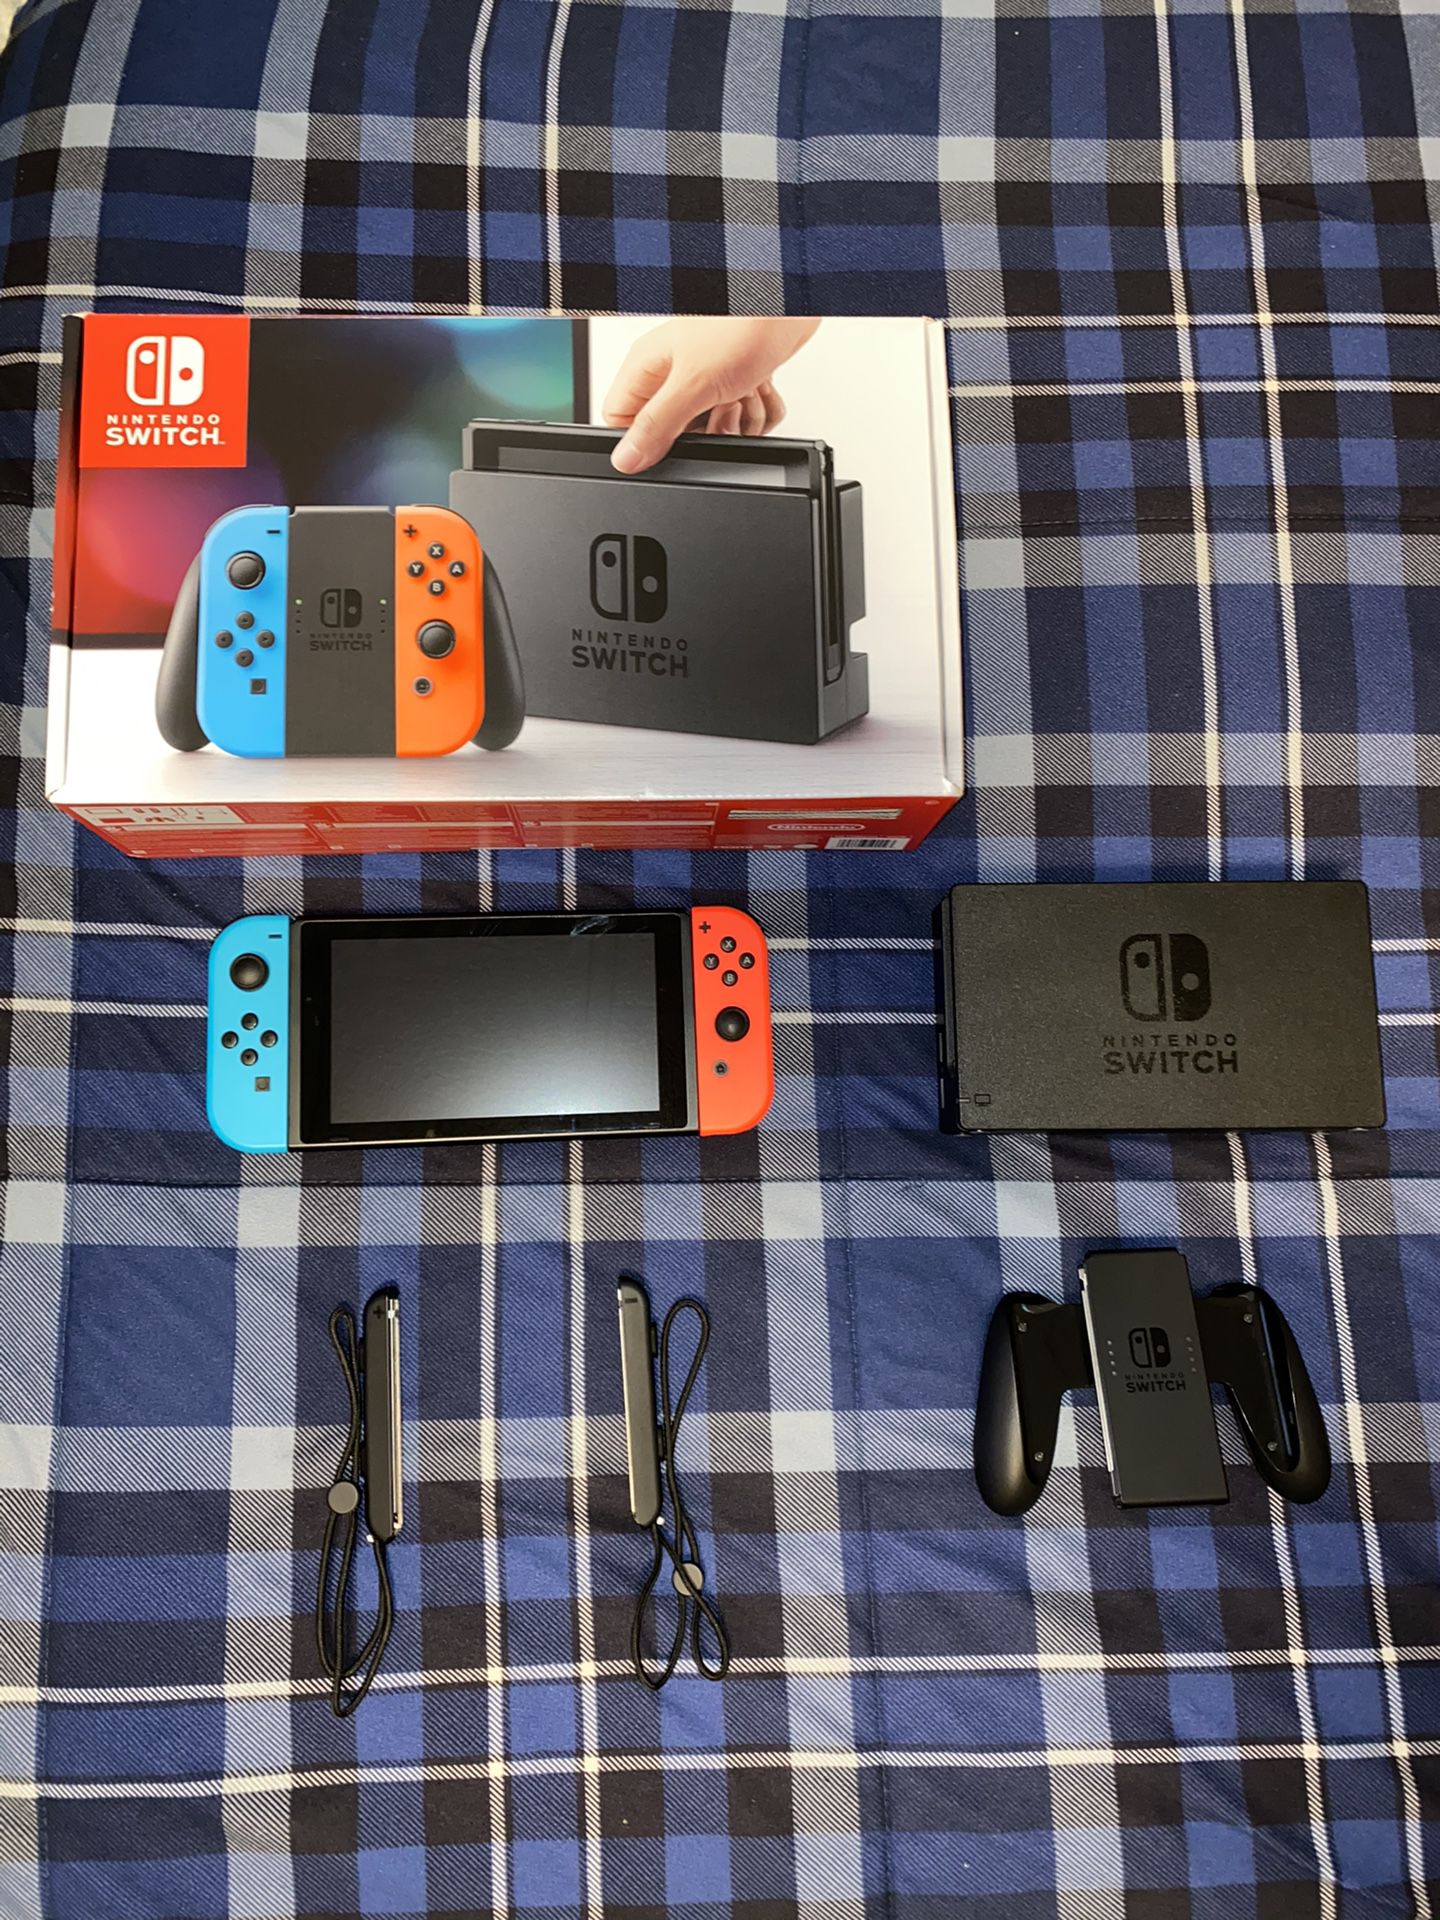 Used Nintendo Switch (basically new) comes with switch dock, Mario cart, Carrying Case and accessories